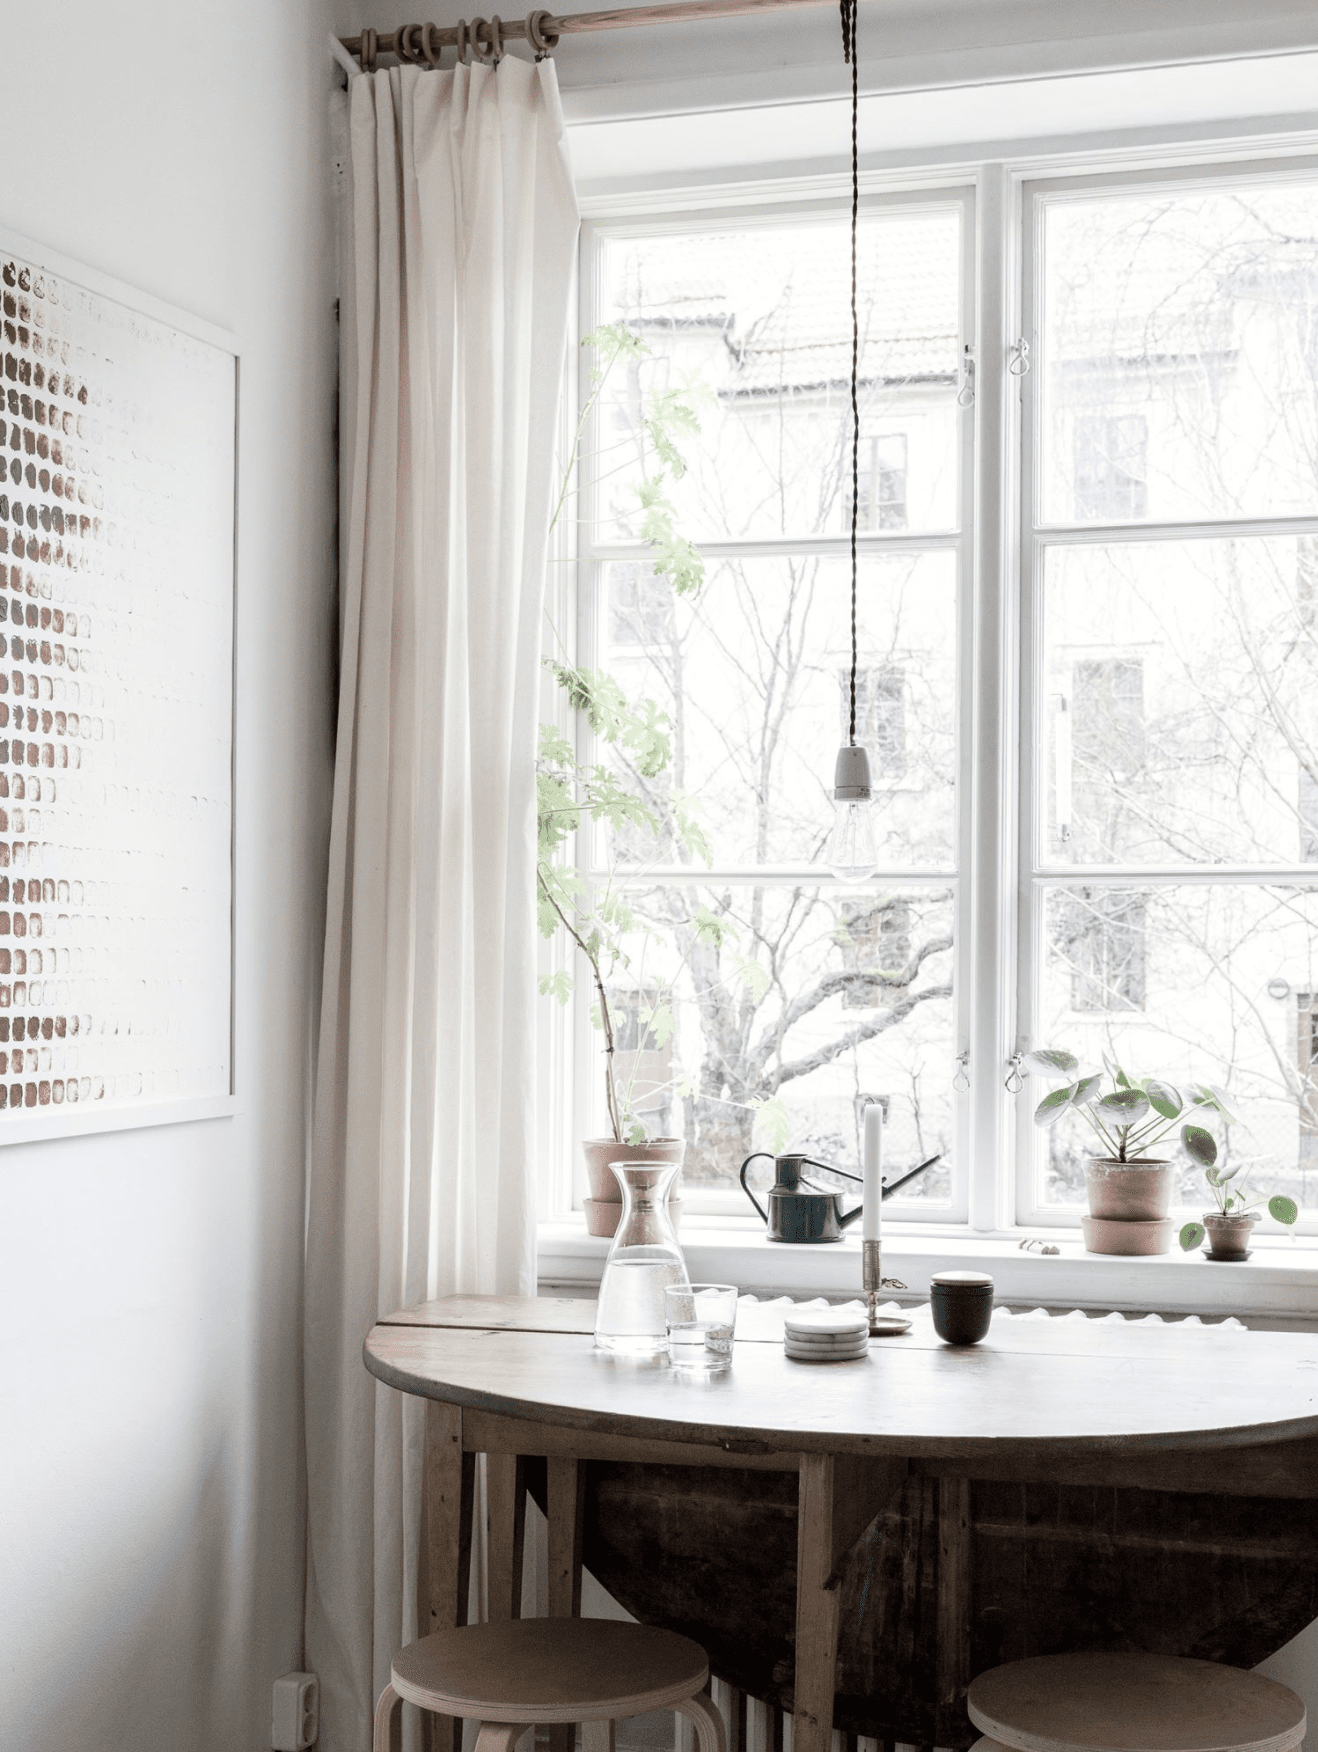 Cozy home finished with wood accents – COCO LAPINE DESIGN